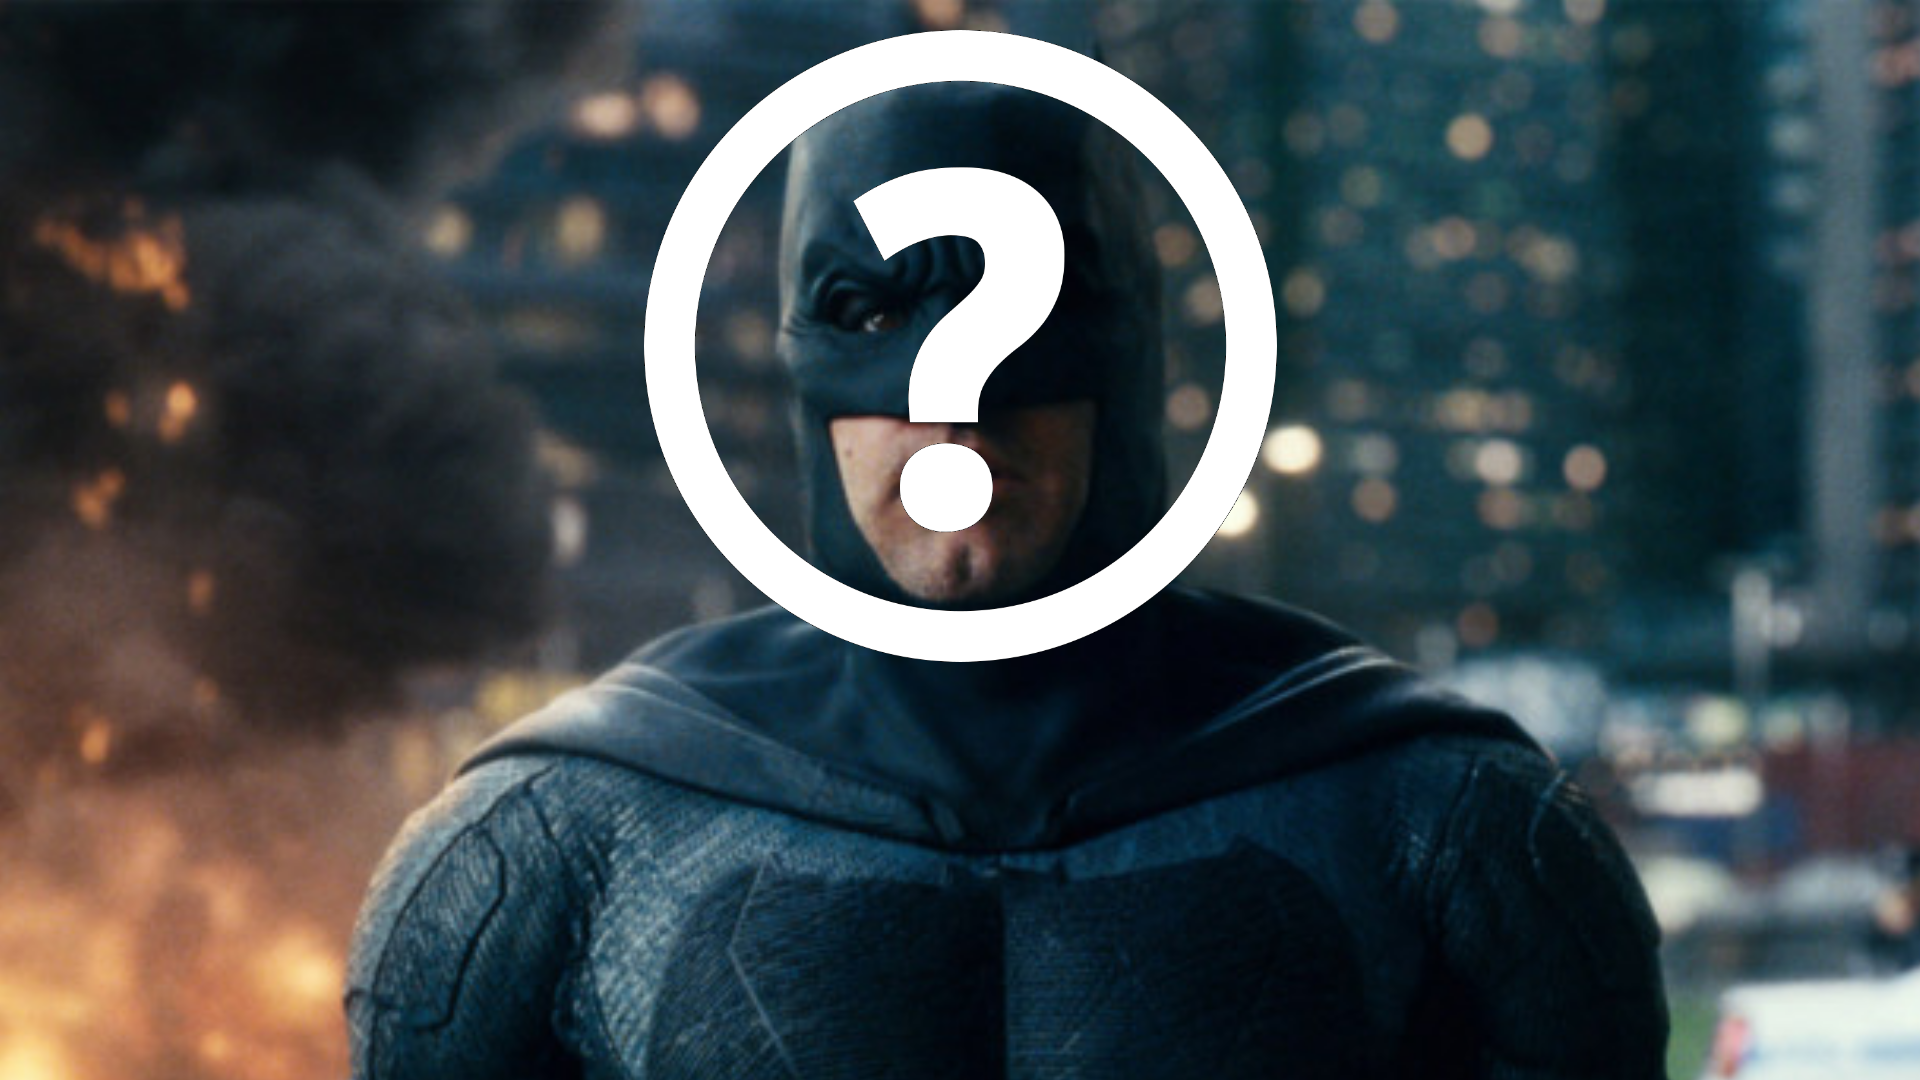 Batfleck Out, but who’s in?